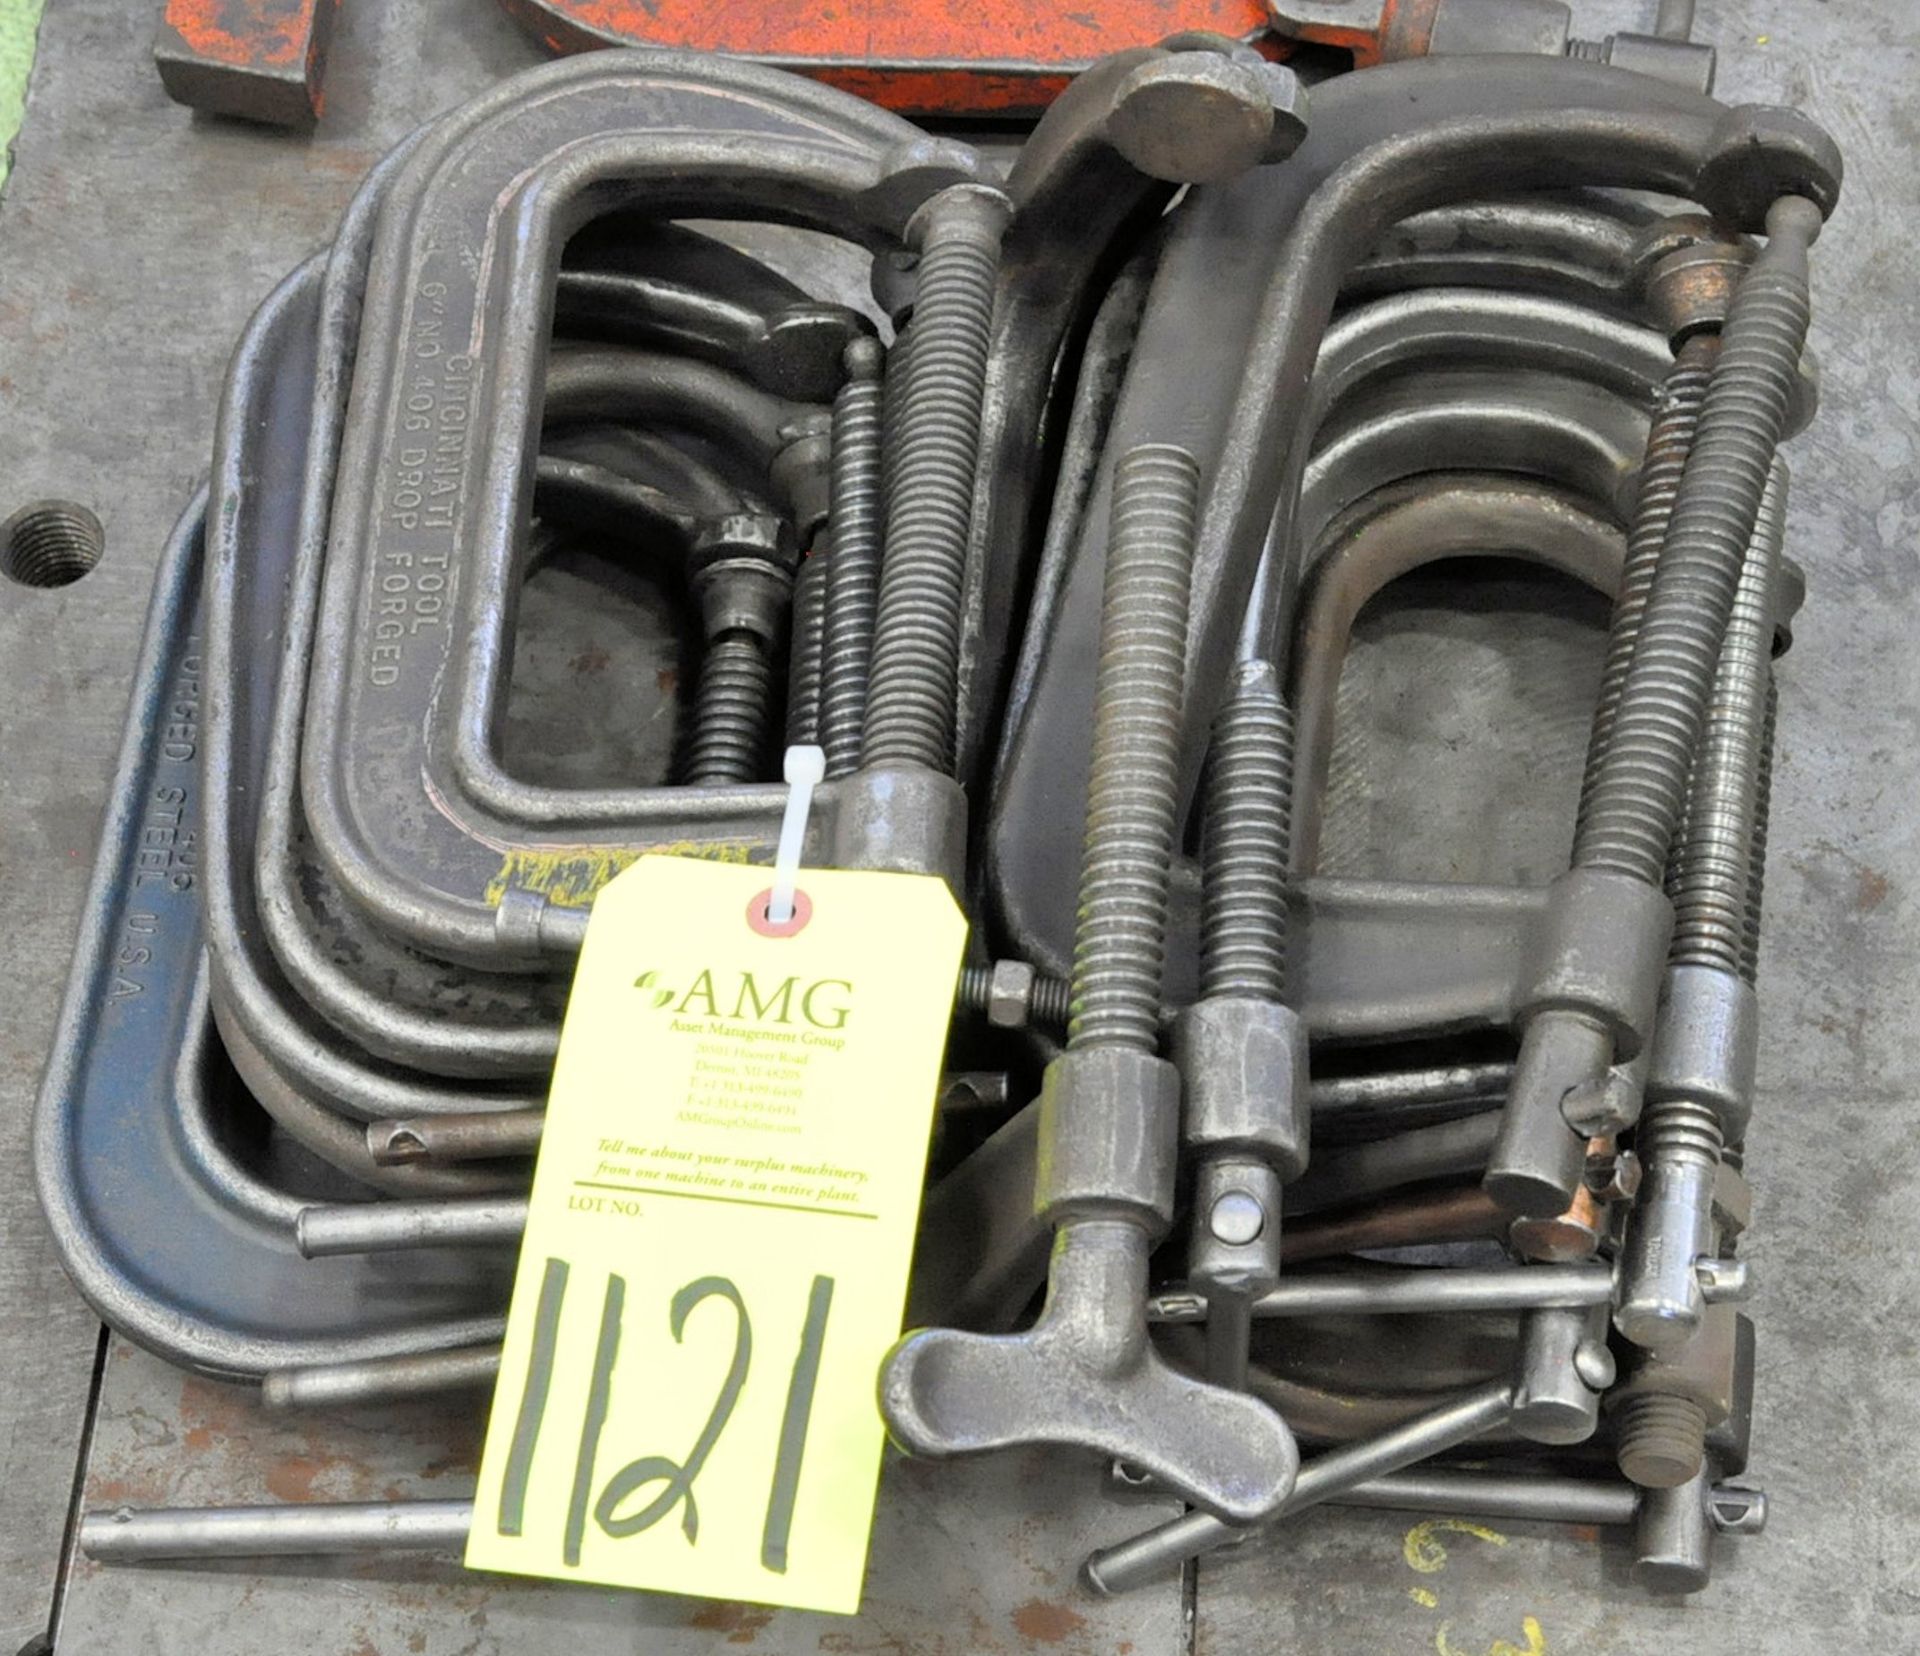 Lot-6" C-Clamps in (2) Stacks, (G-15), (Yellow Tag)